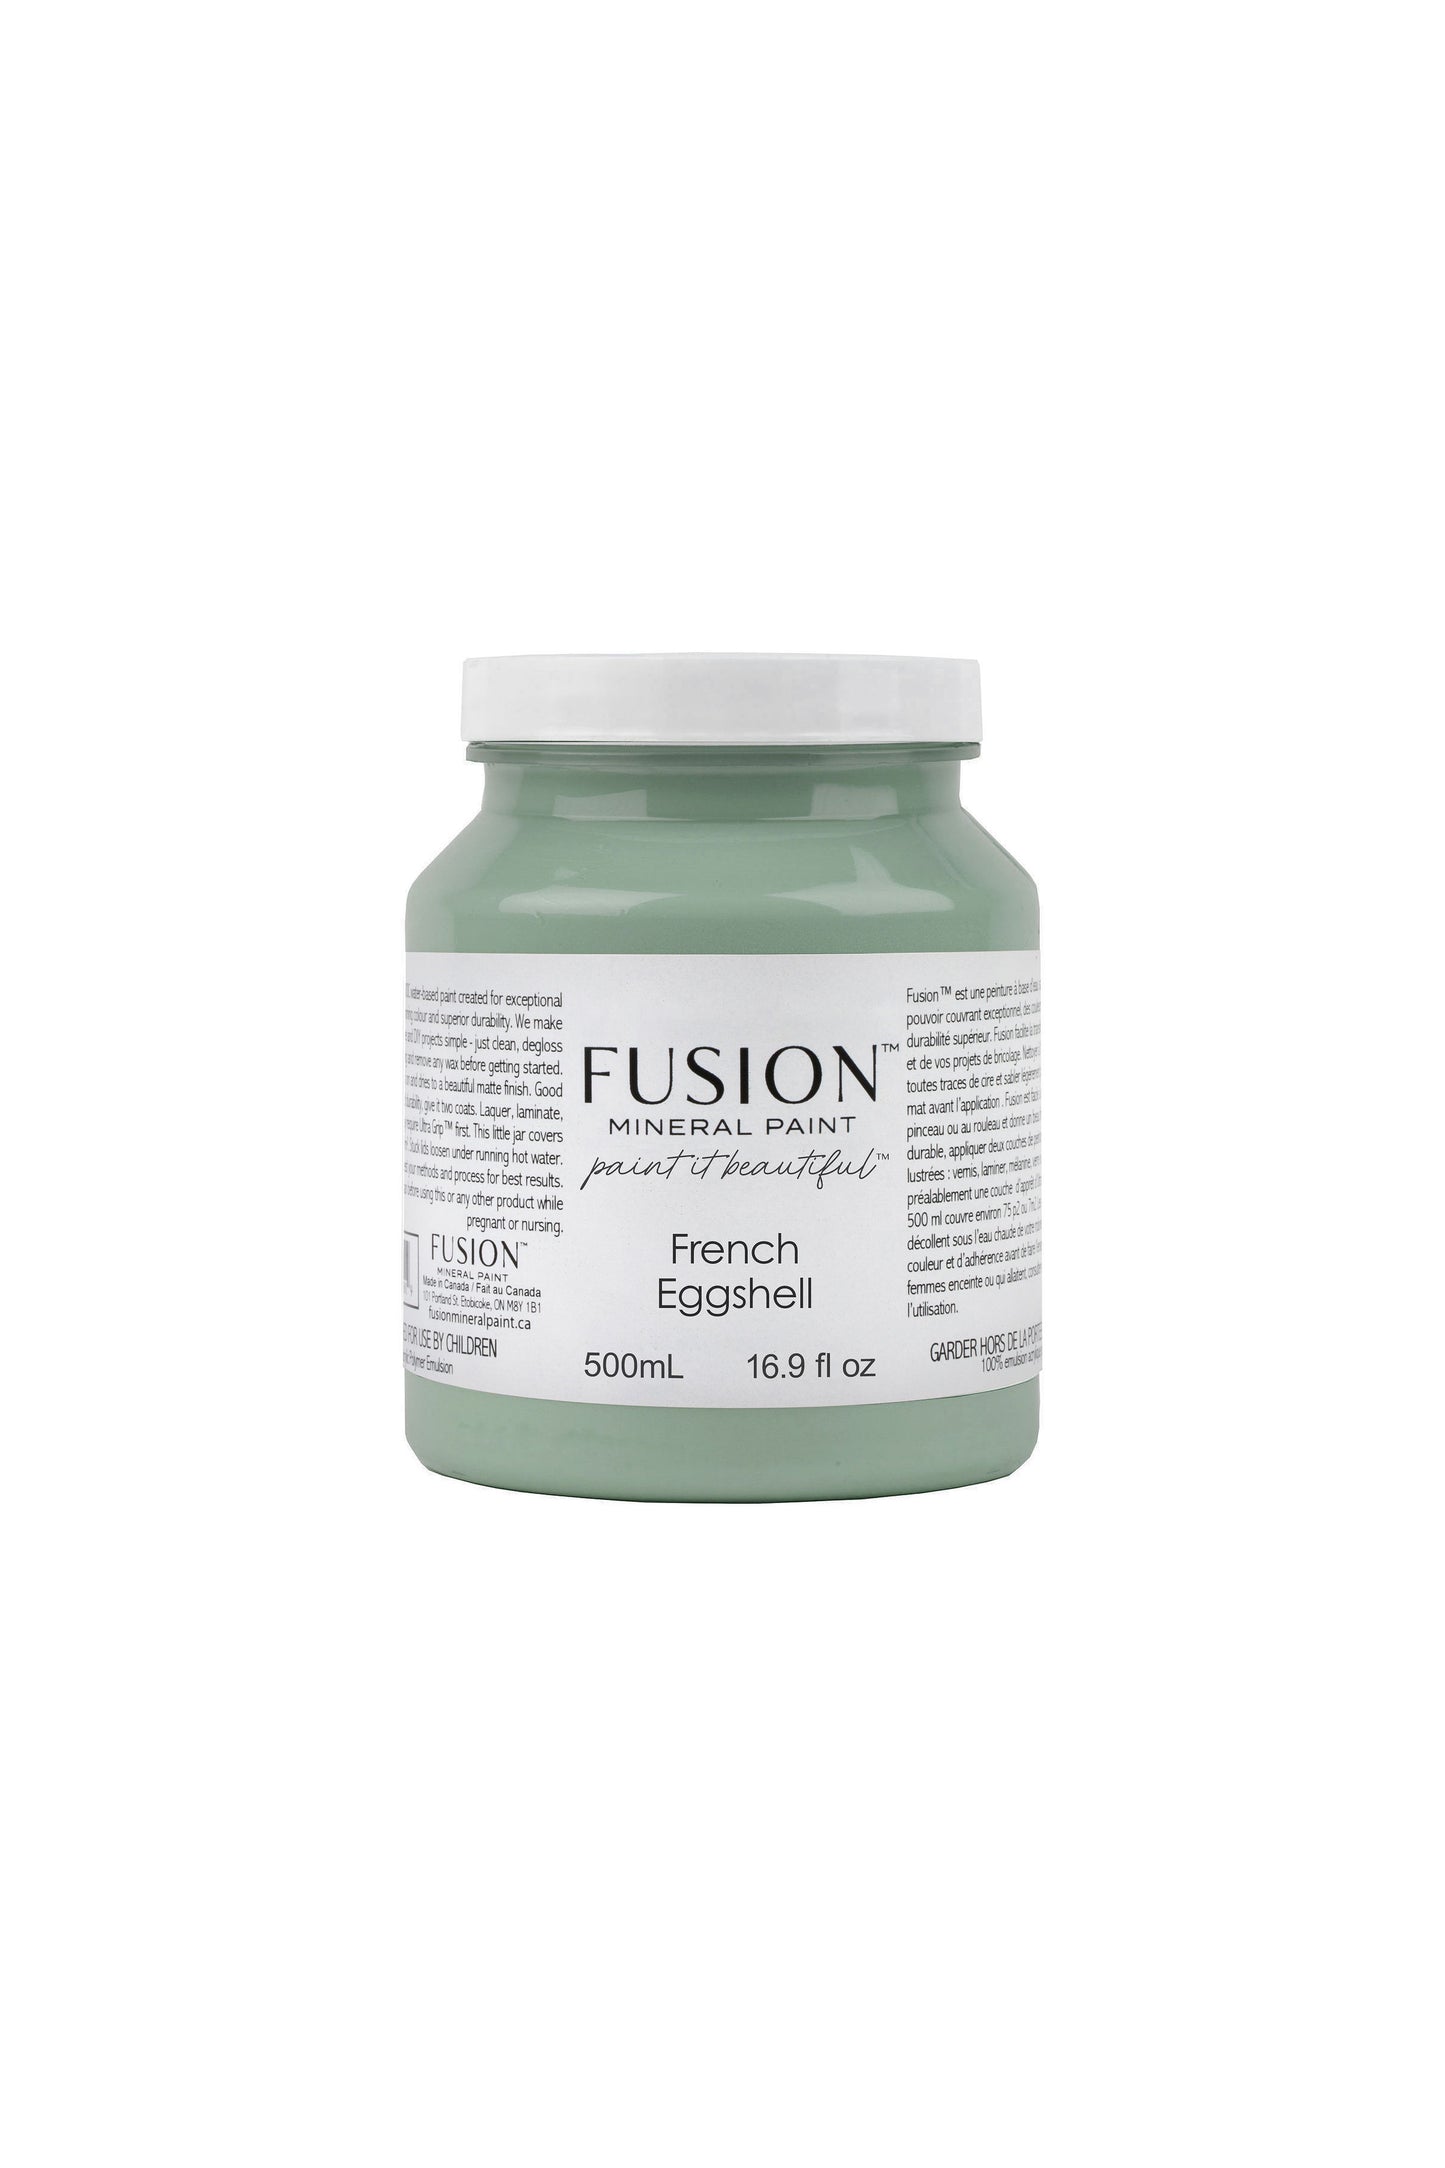 FUSION MINERAL PAINT- French Eggshell